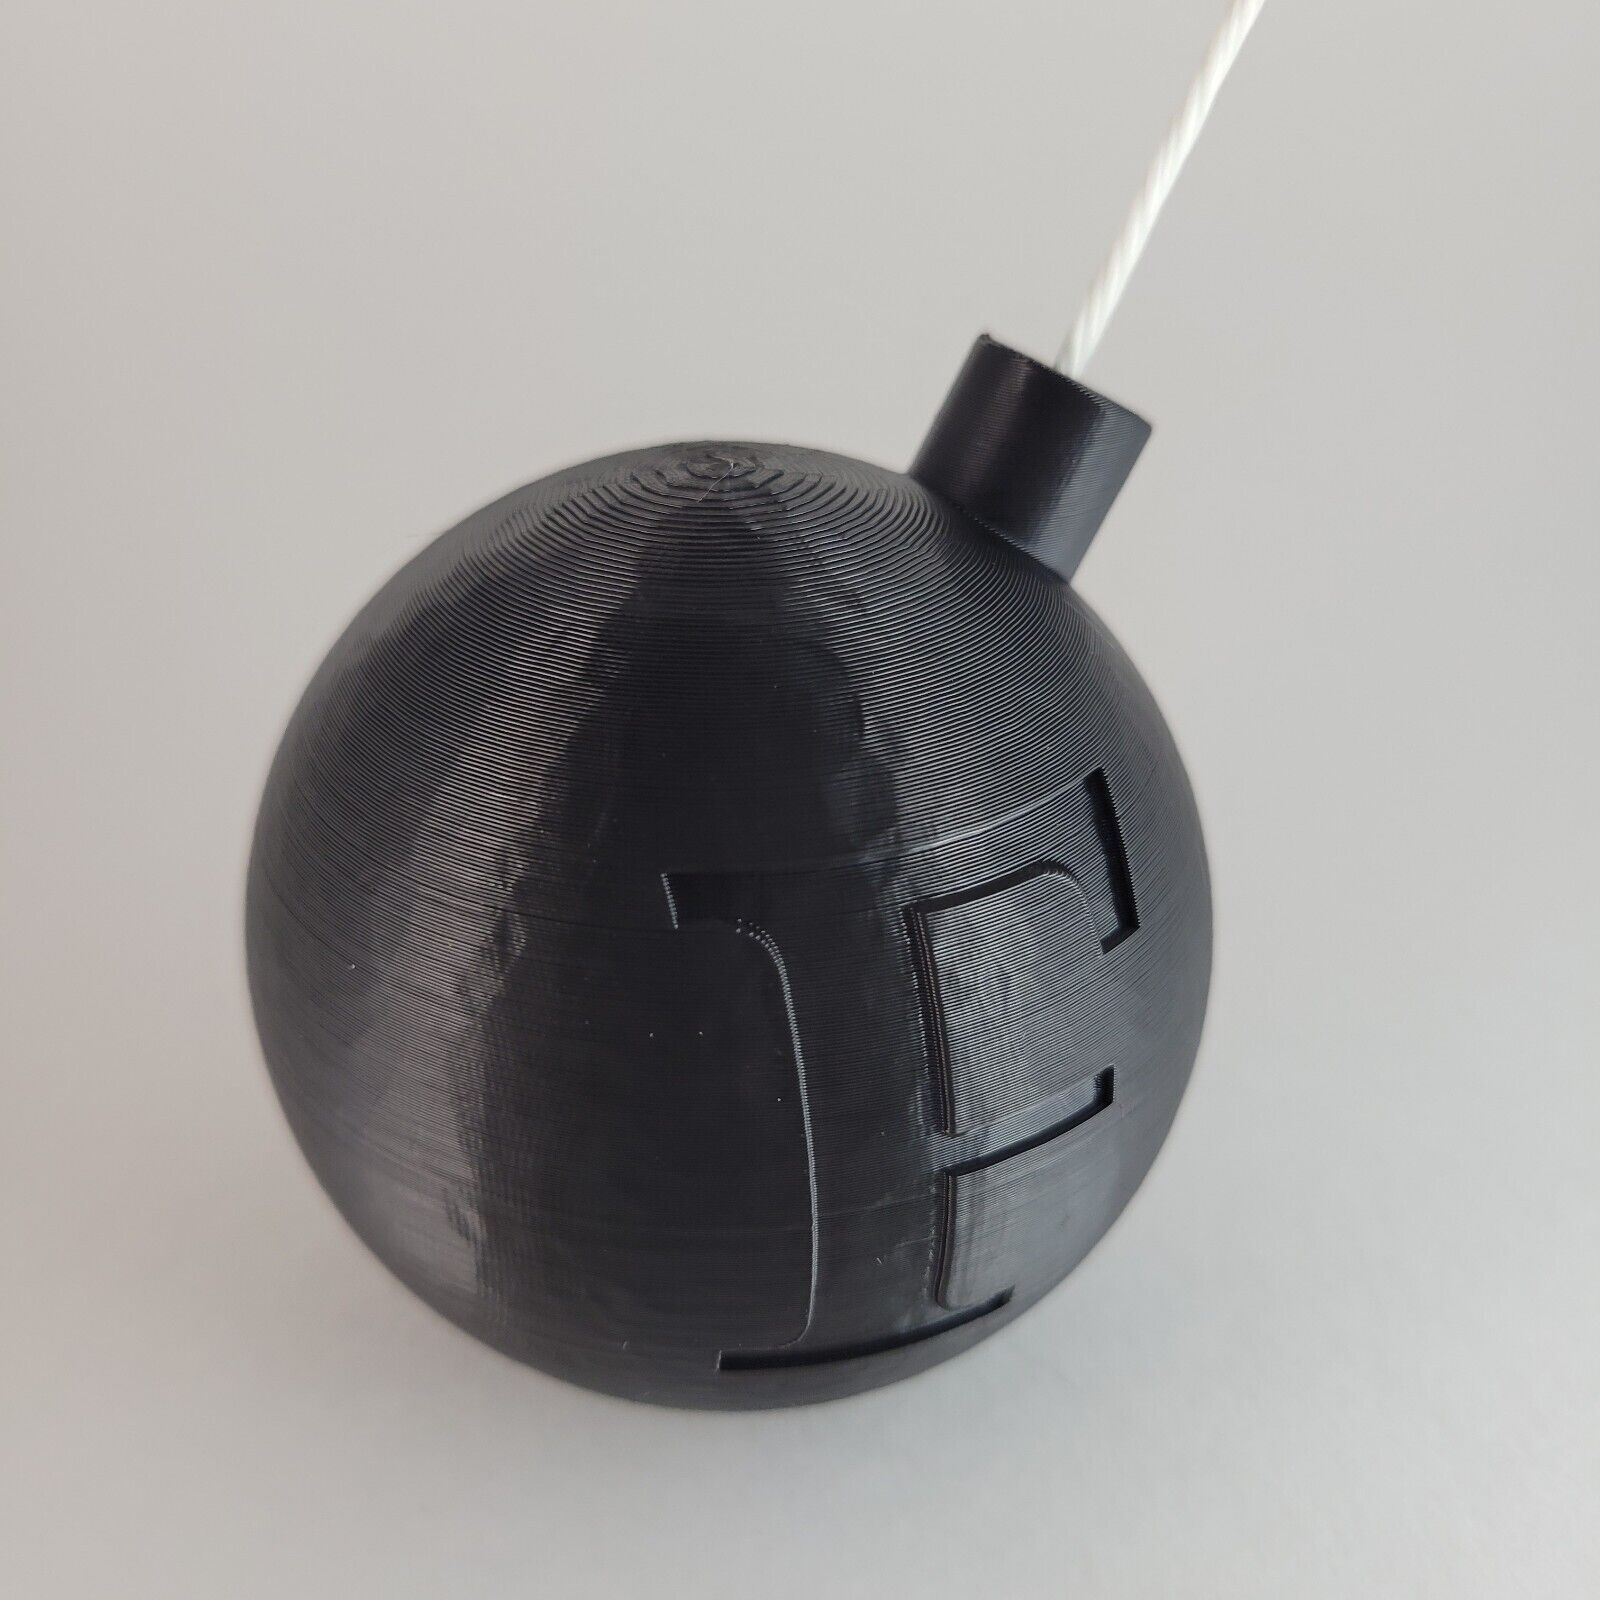 F-BOMB  3 Inch Black Paperweight Fun Gift, Stress Relief Toy, Great gift.